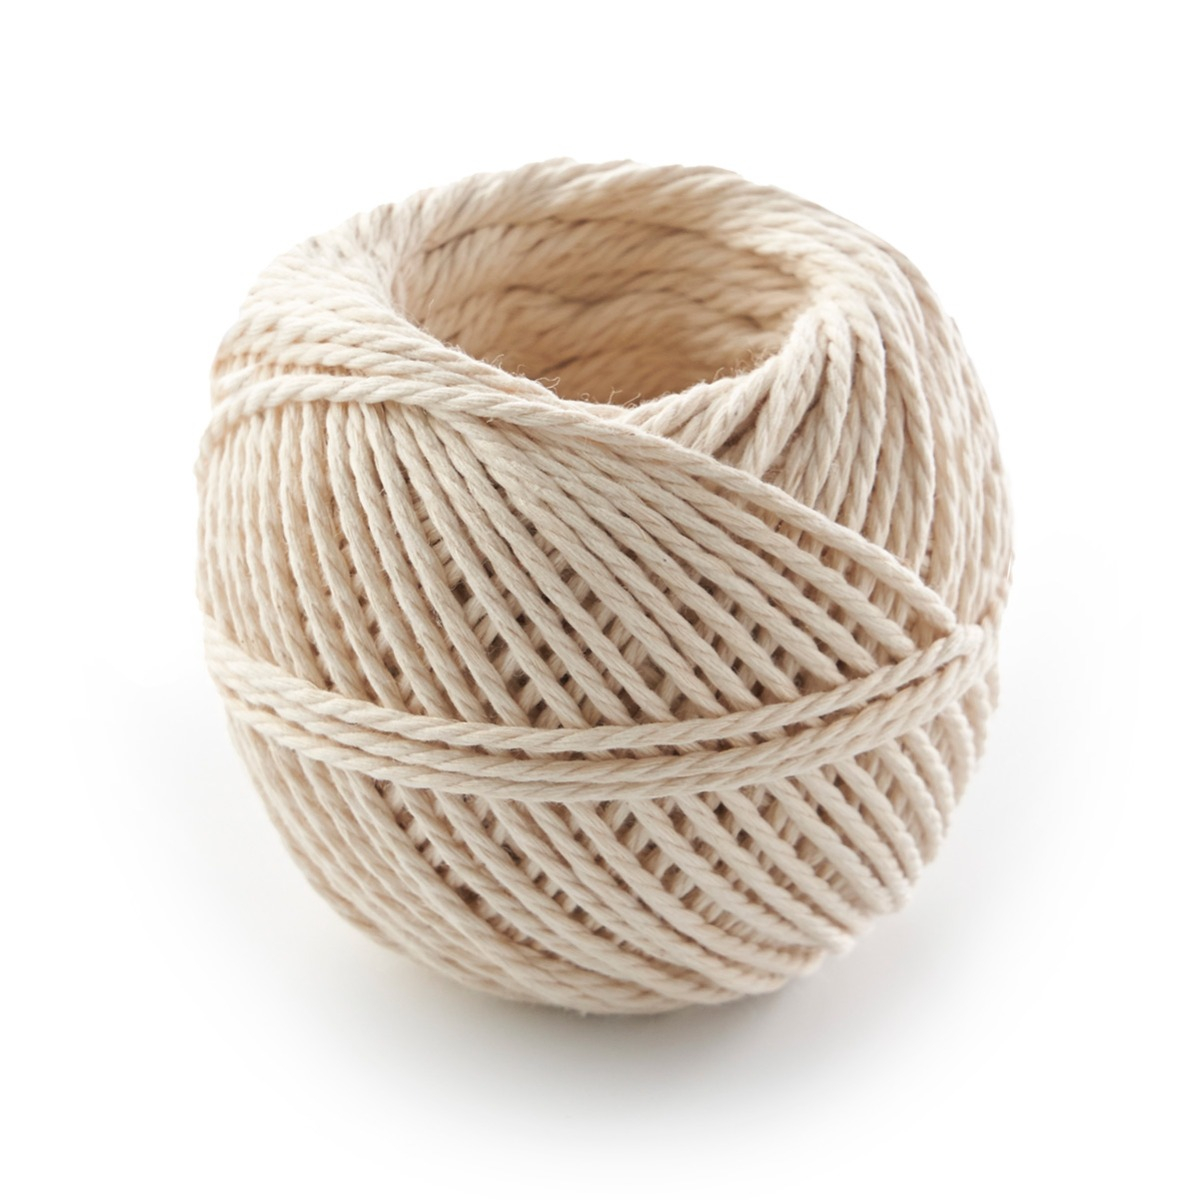 Ecoliving Recycled Natural Cotton Twine Refill Ball String